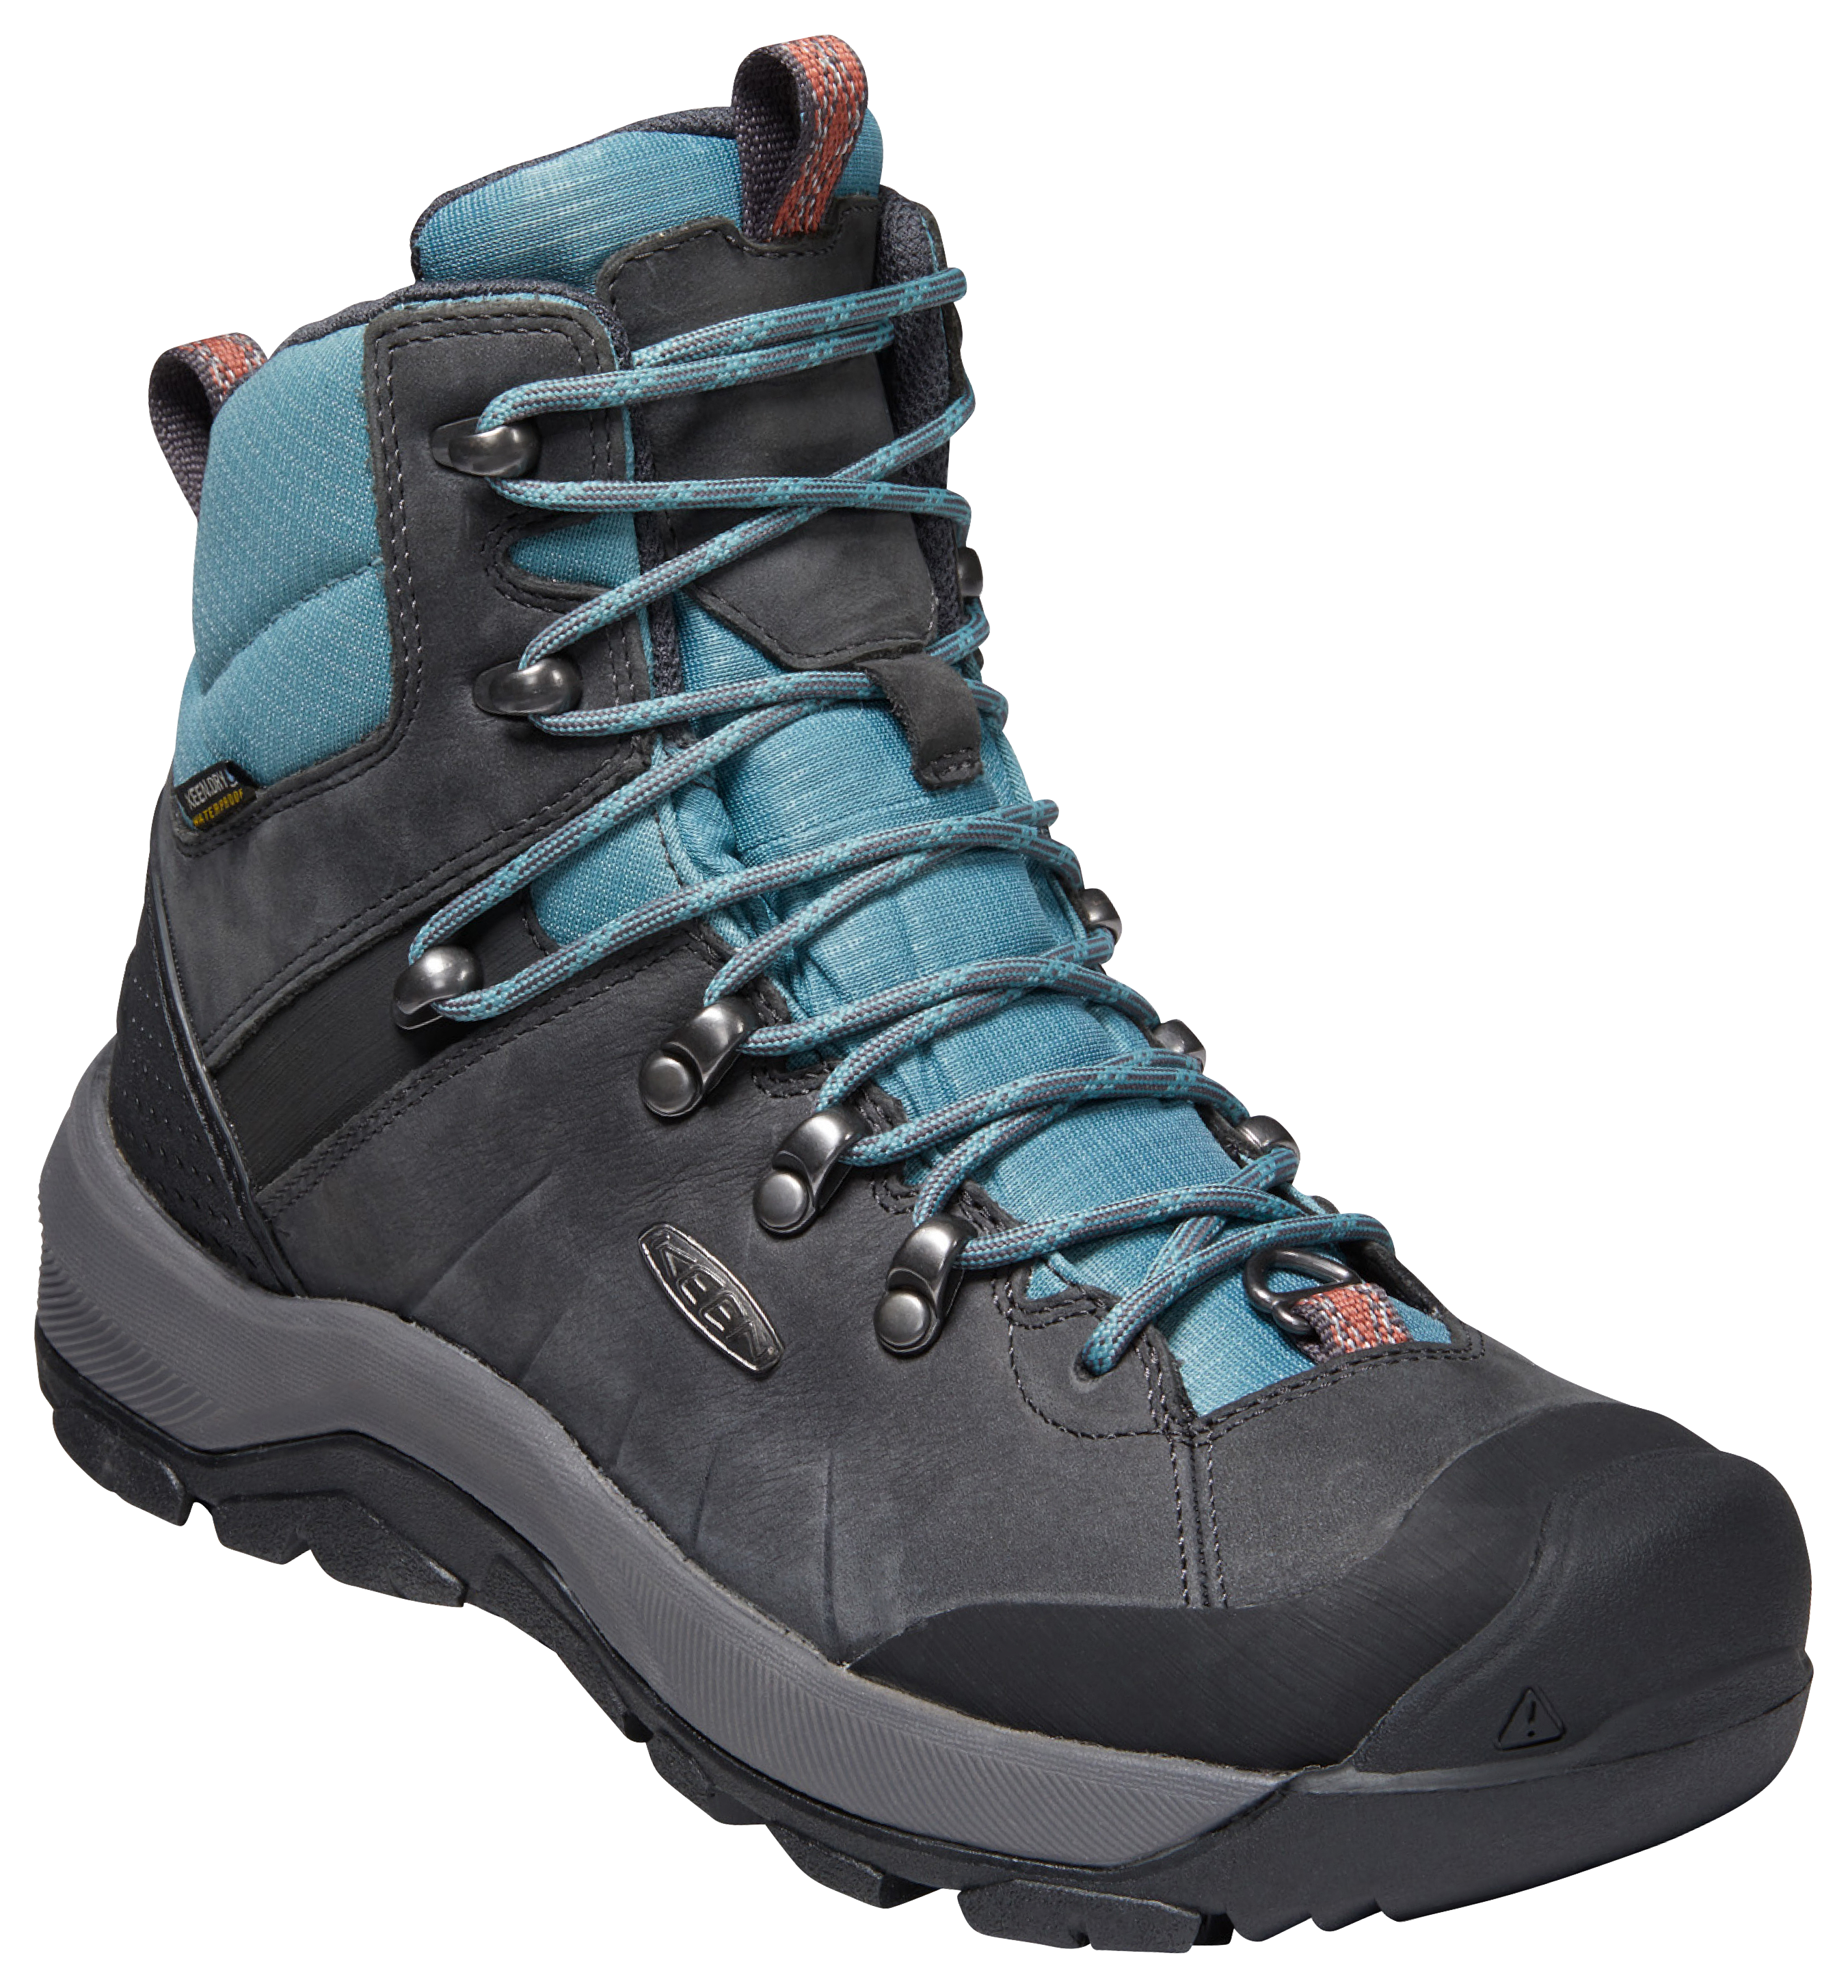 KEEN Revel IV Polar Insulated Waterproof Hiking Boots for Ladies - Magnet/North Atlantic - 6M